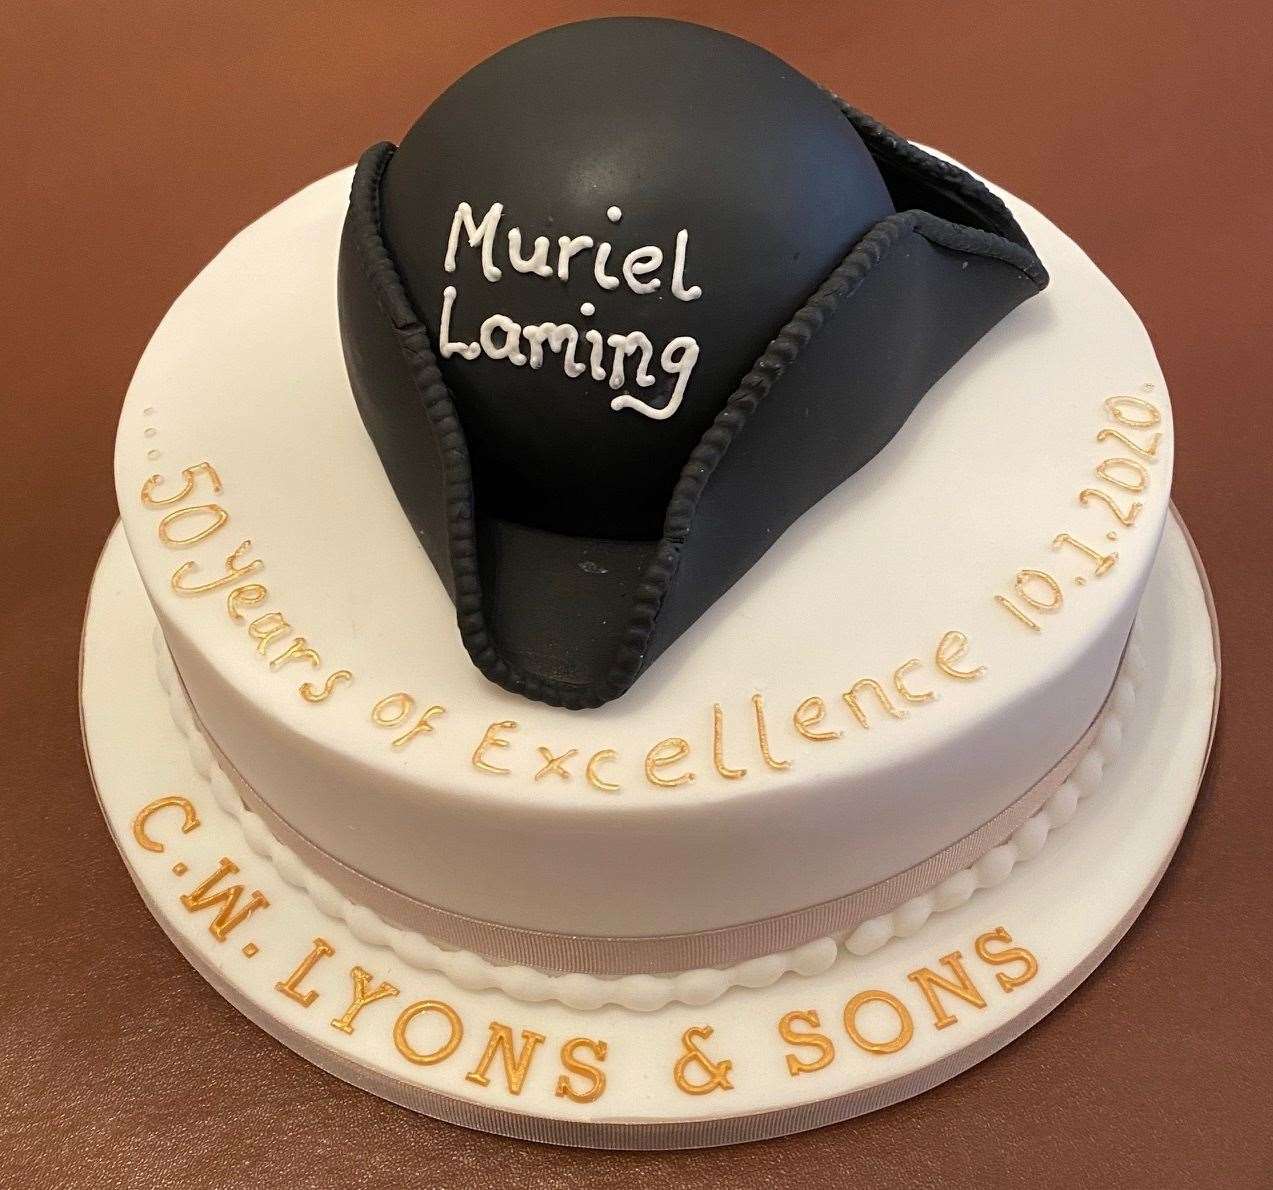 Muriel's cake to mark 50 years with the company. Picture: Mark Laming